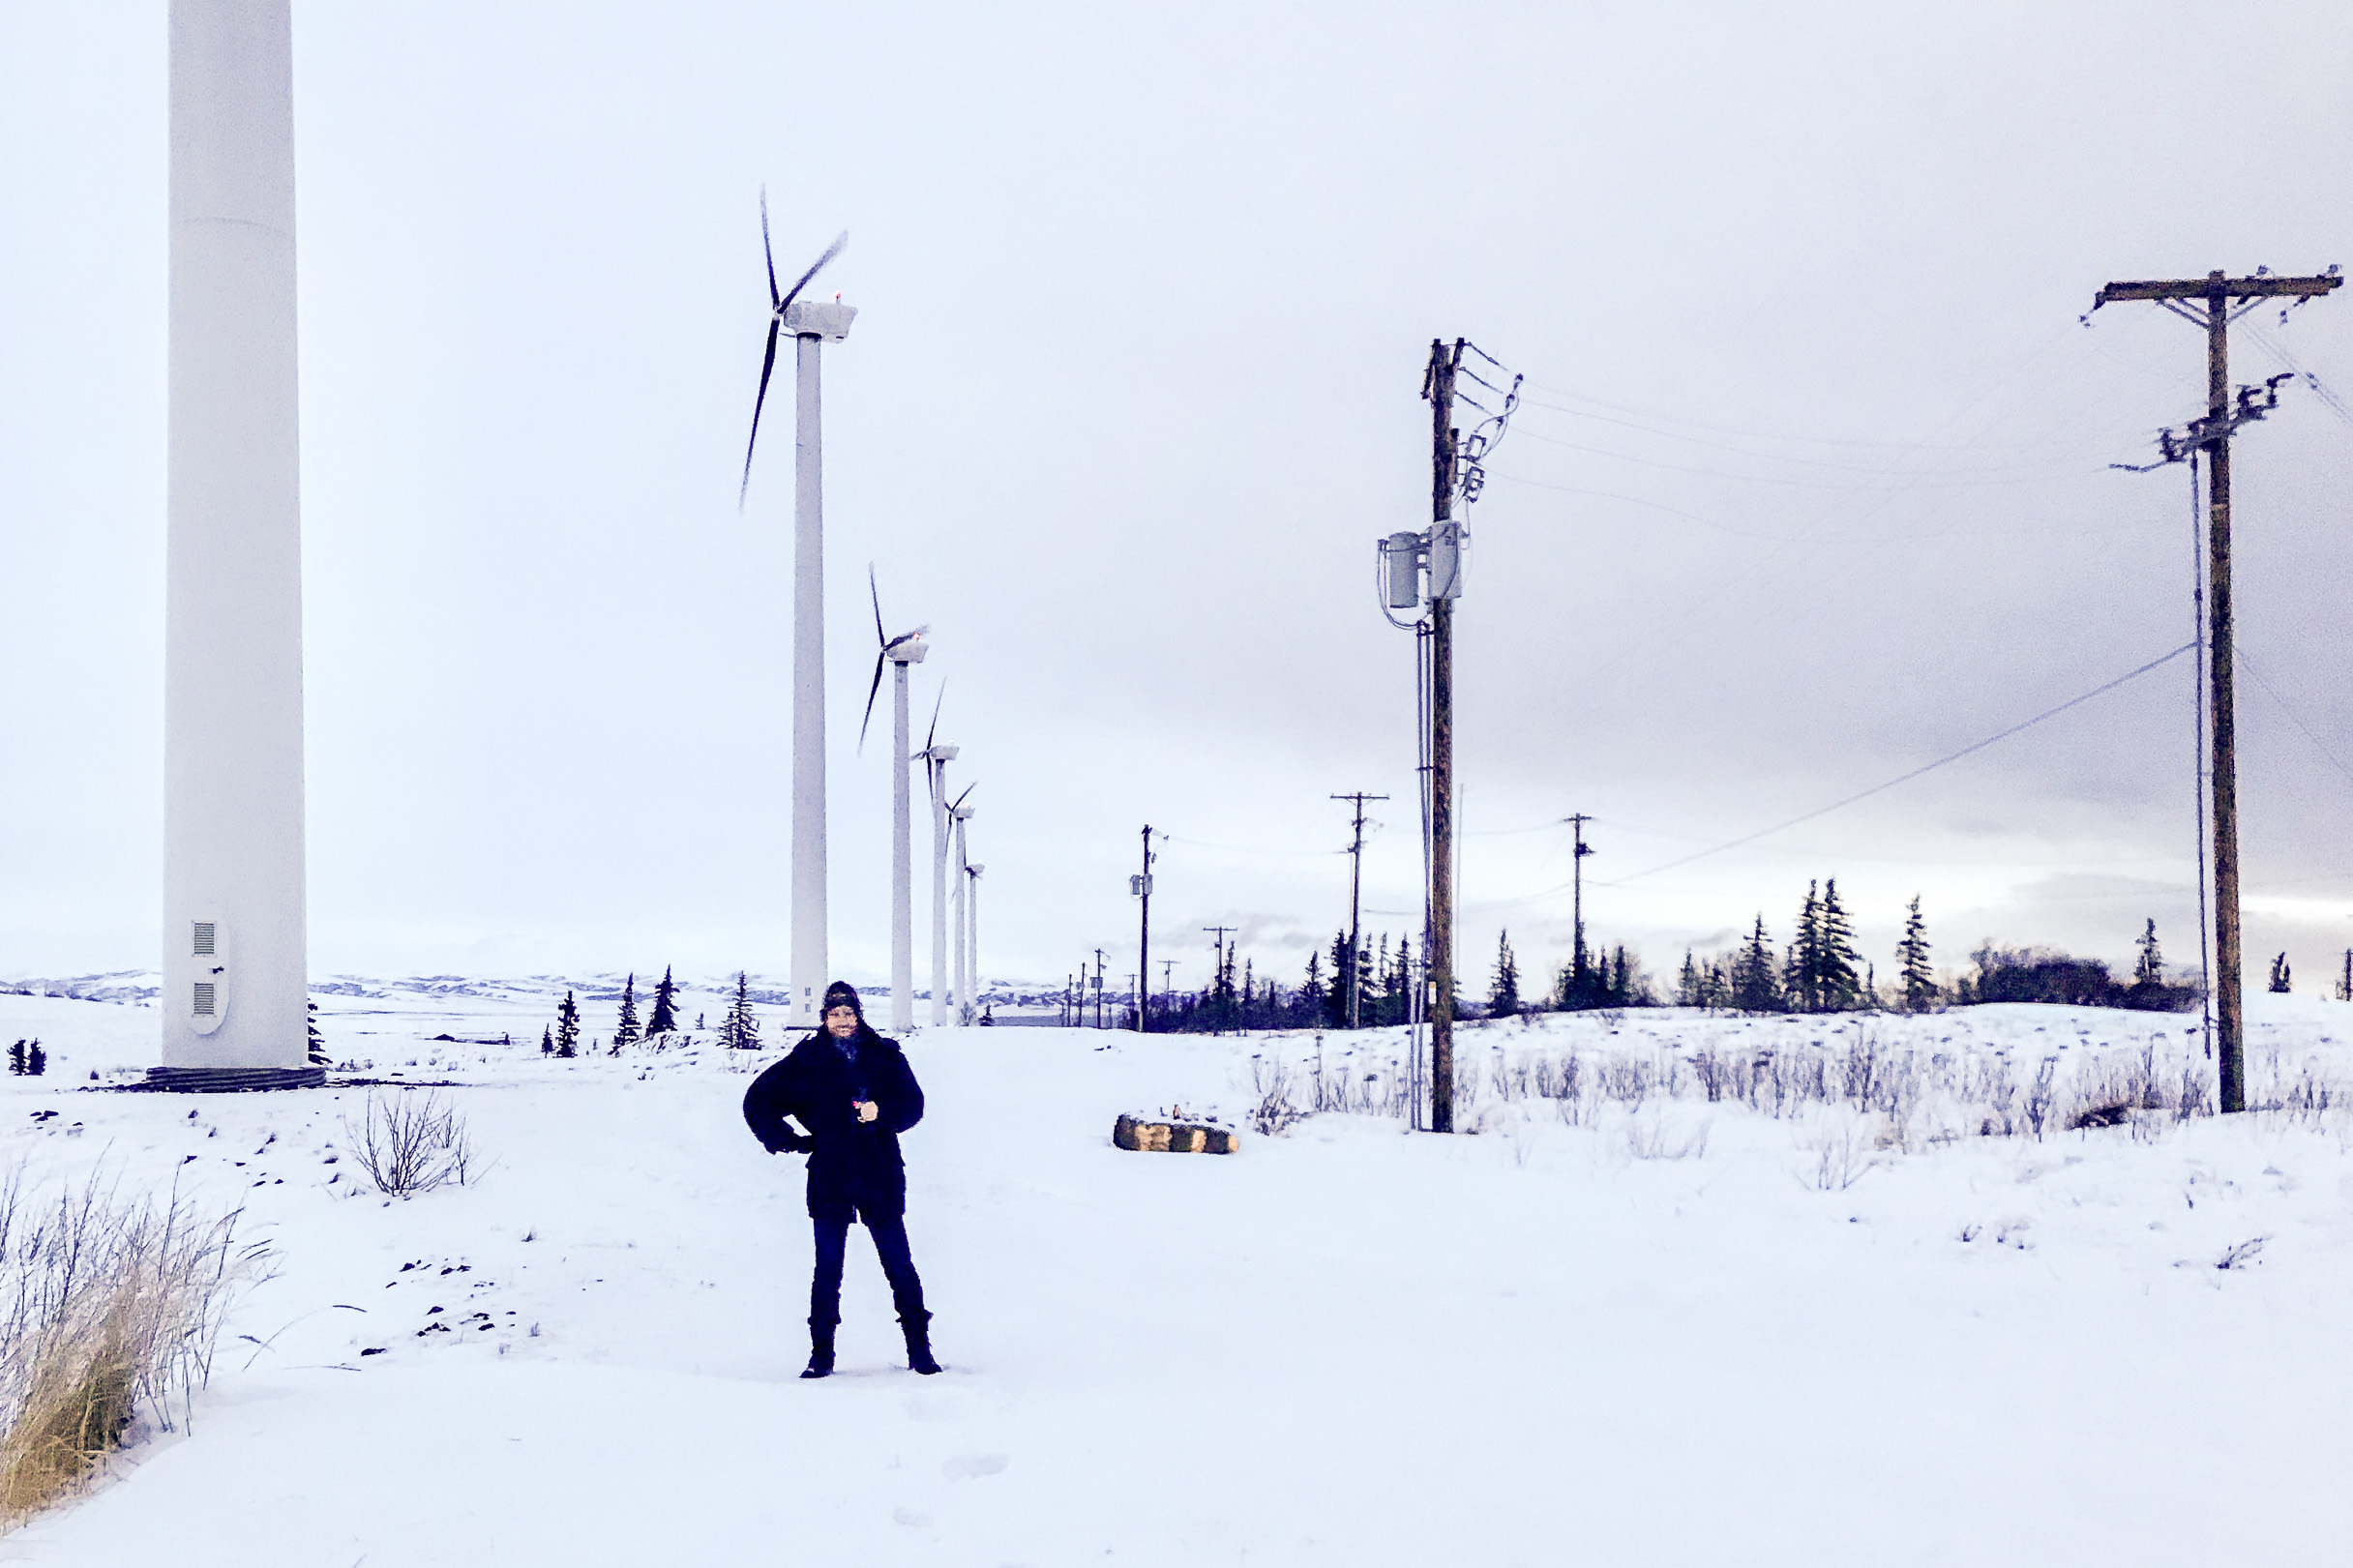 Man in heavy jacket stands in front of large array of wind turbines